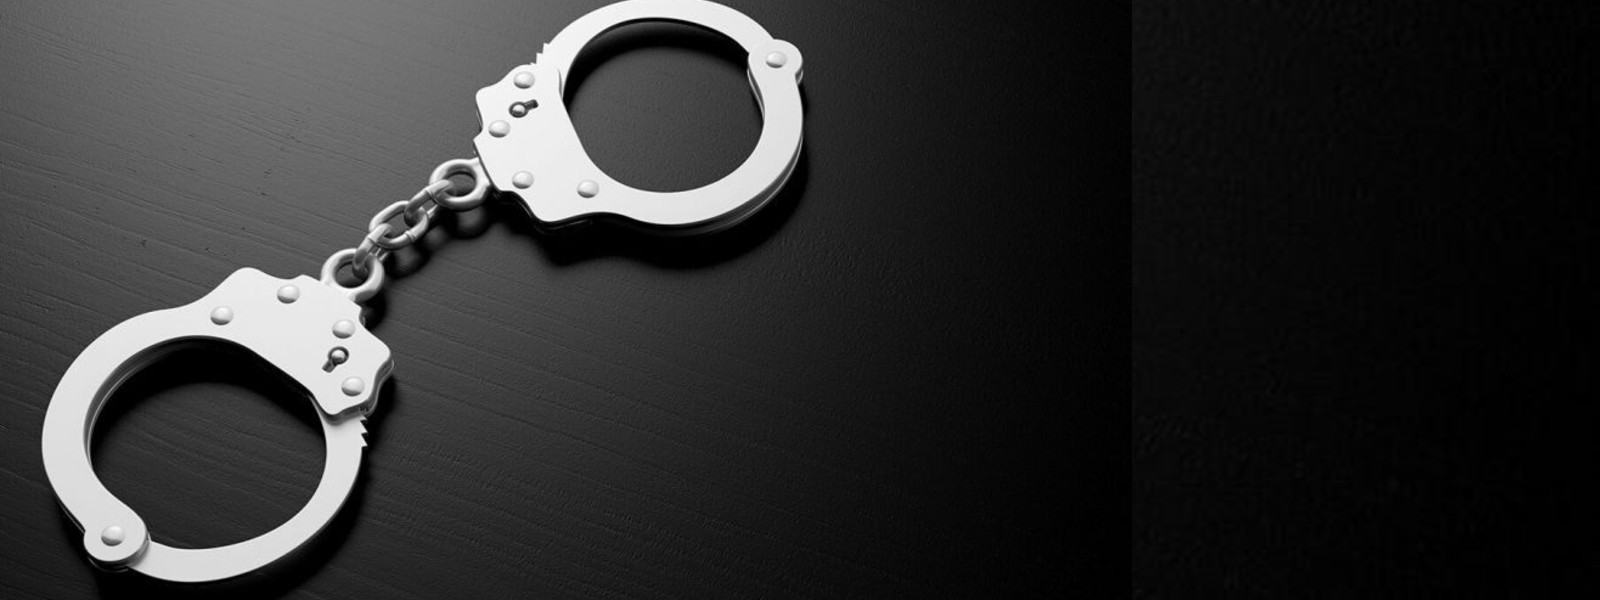 19-year-old arrested for posting fake content to create disharmony; Police